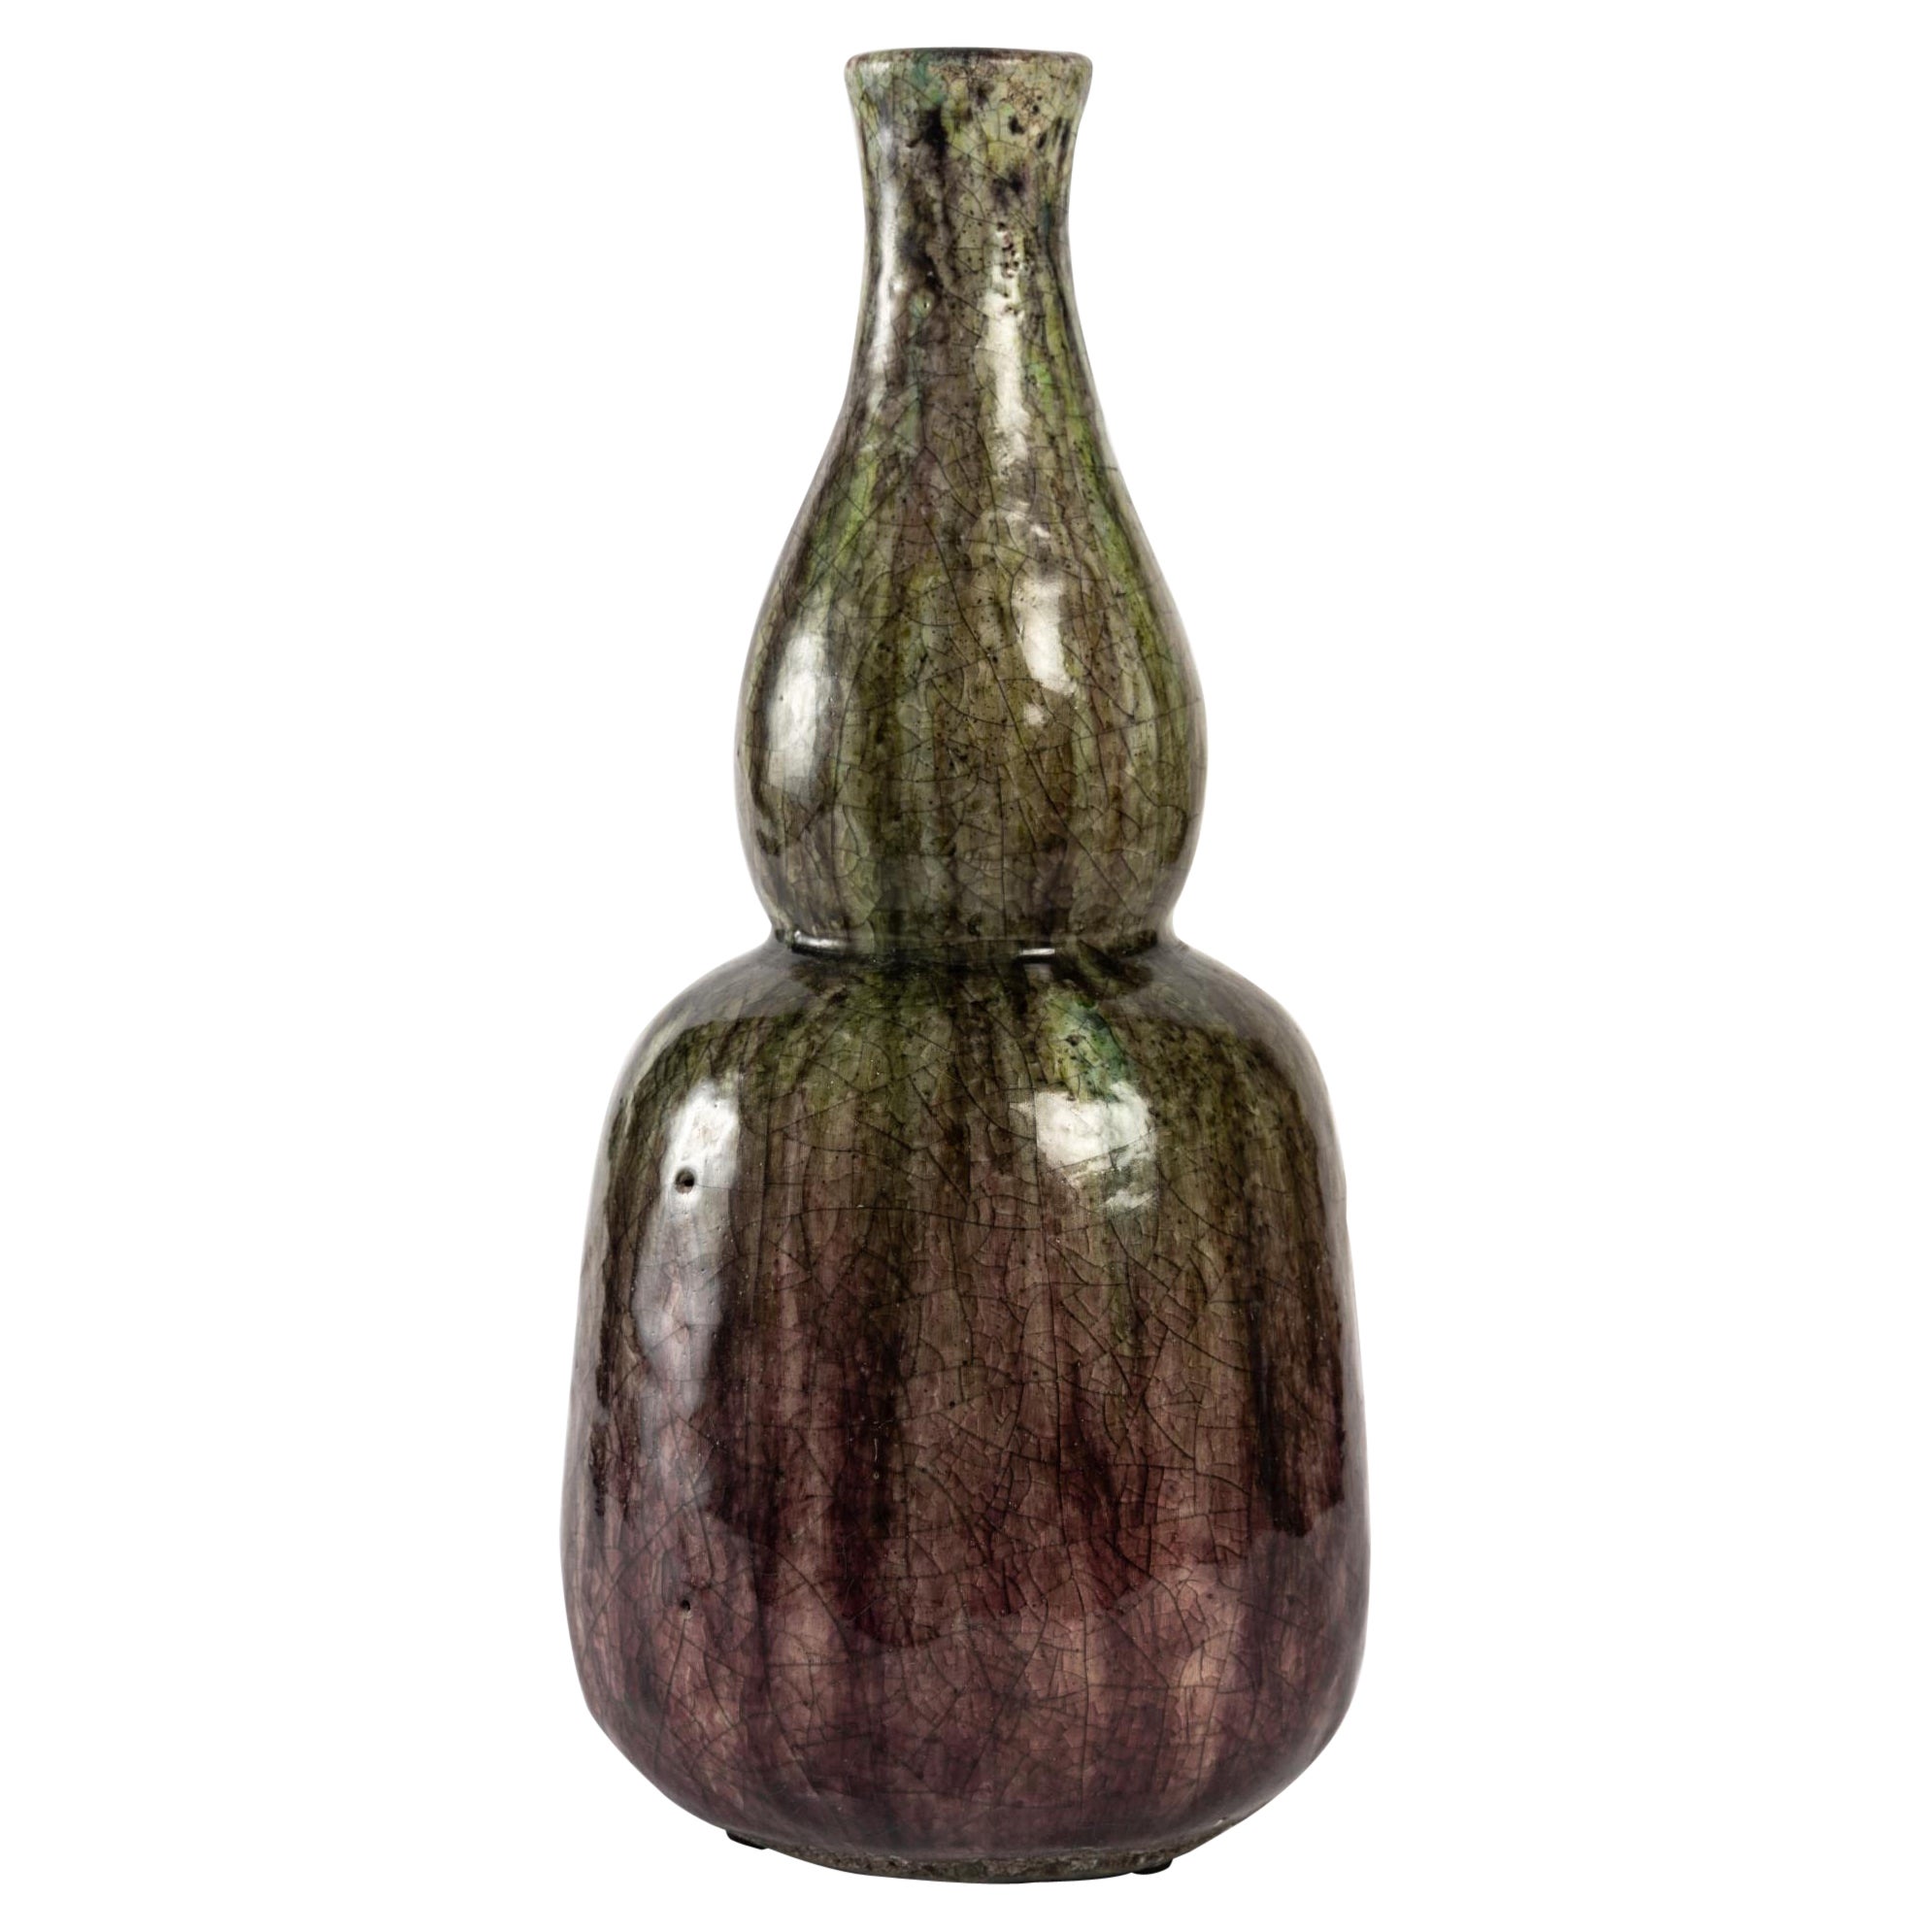 Porcelain Stoneware Vase in the Shape of a Double Gourd